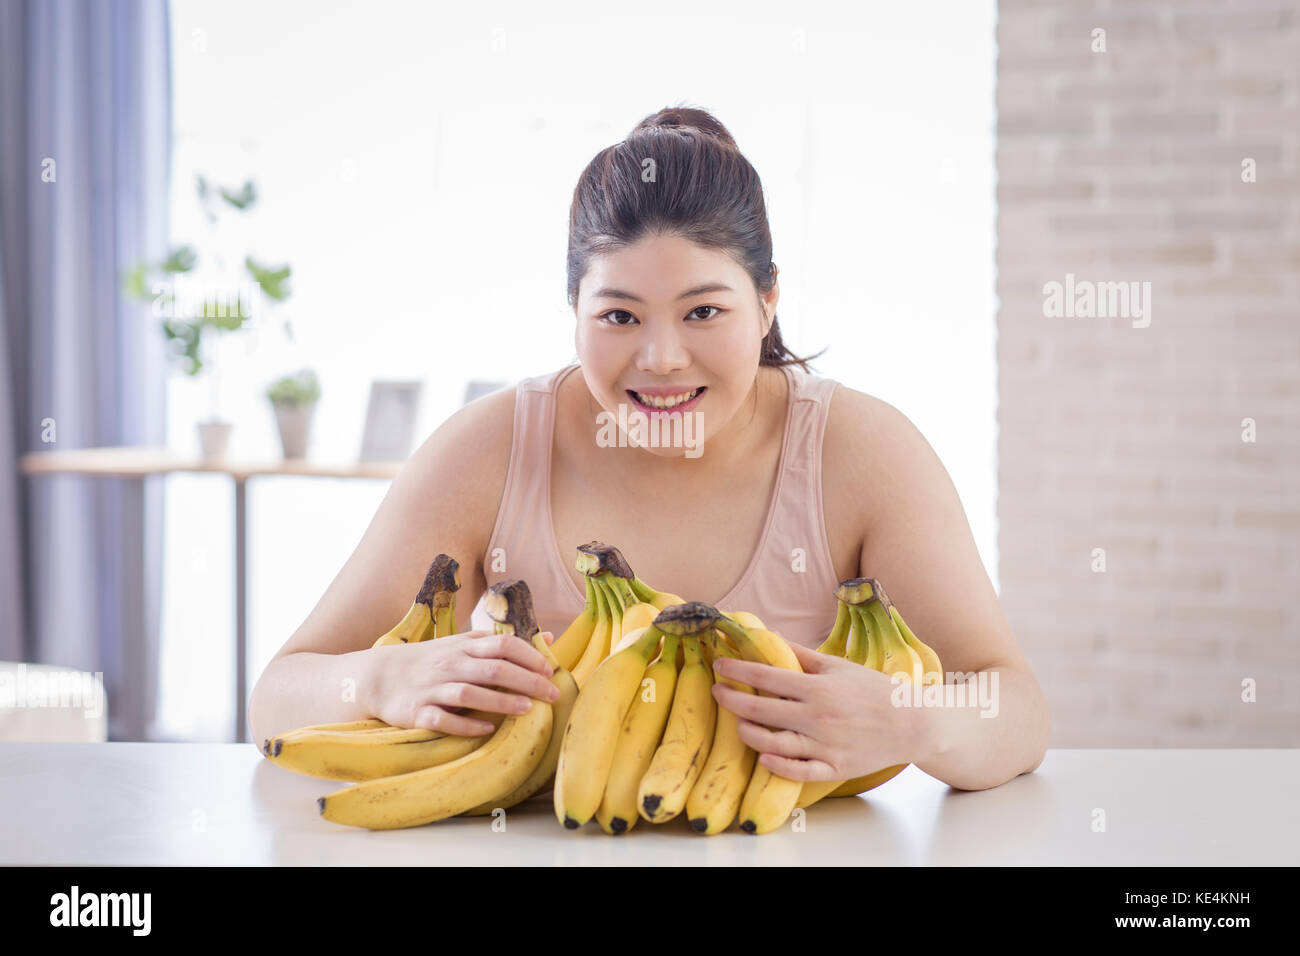 Portrait of young smiling fat woman with bananas Stock Photo